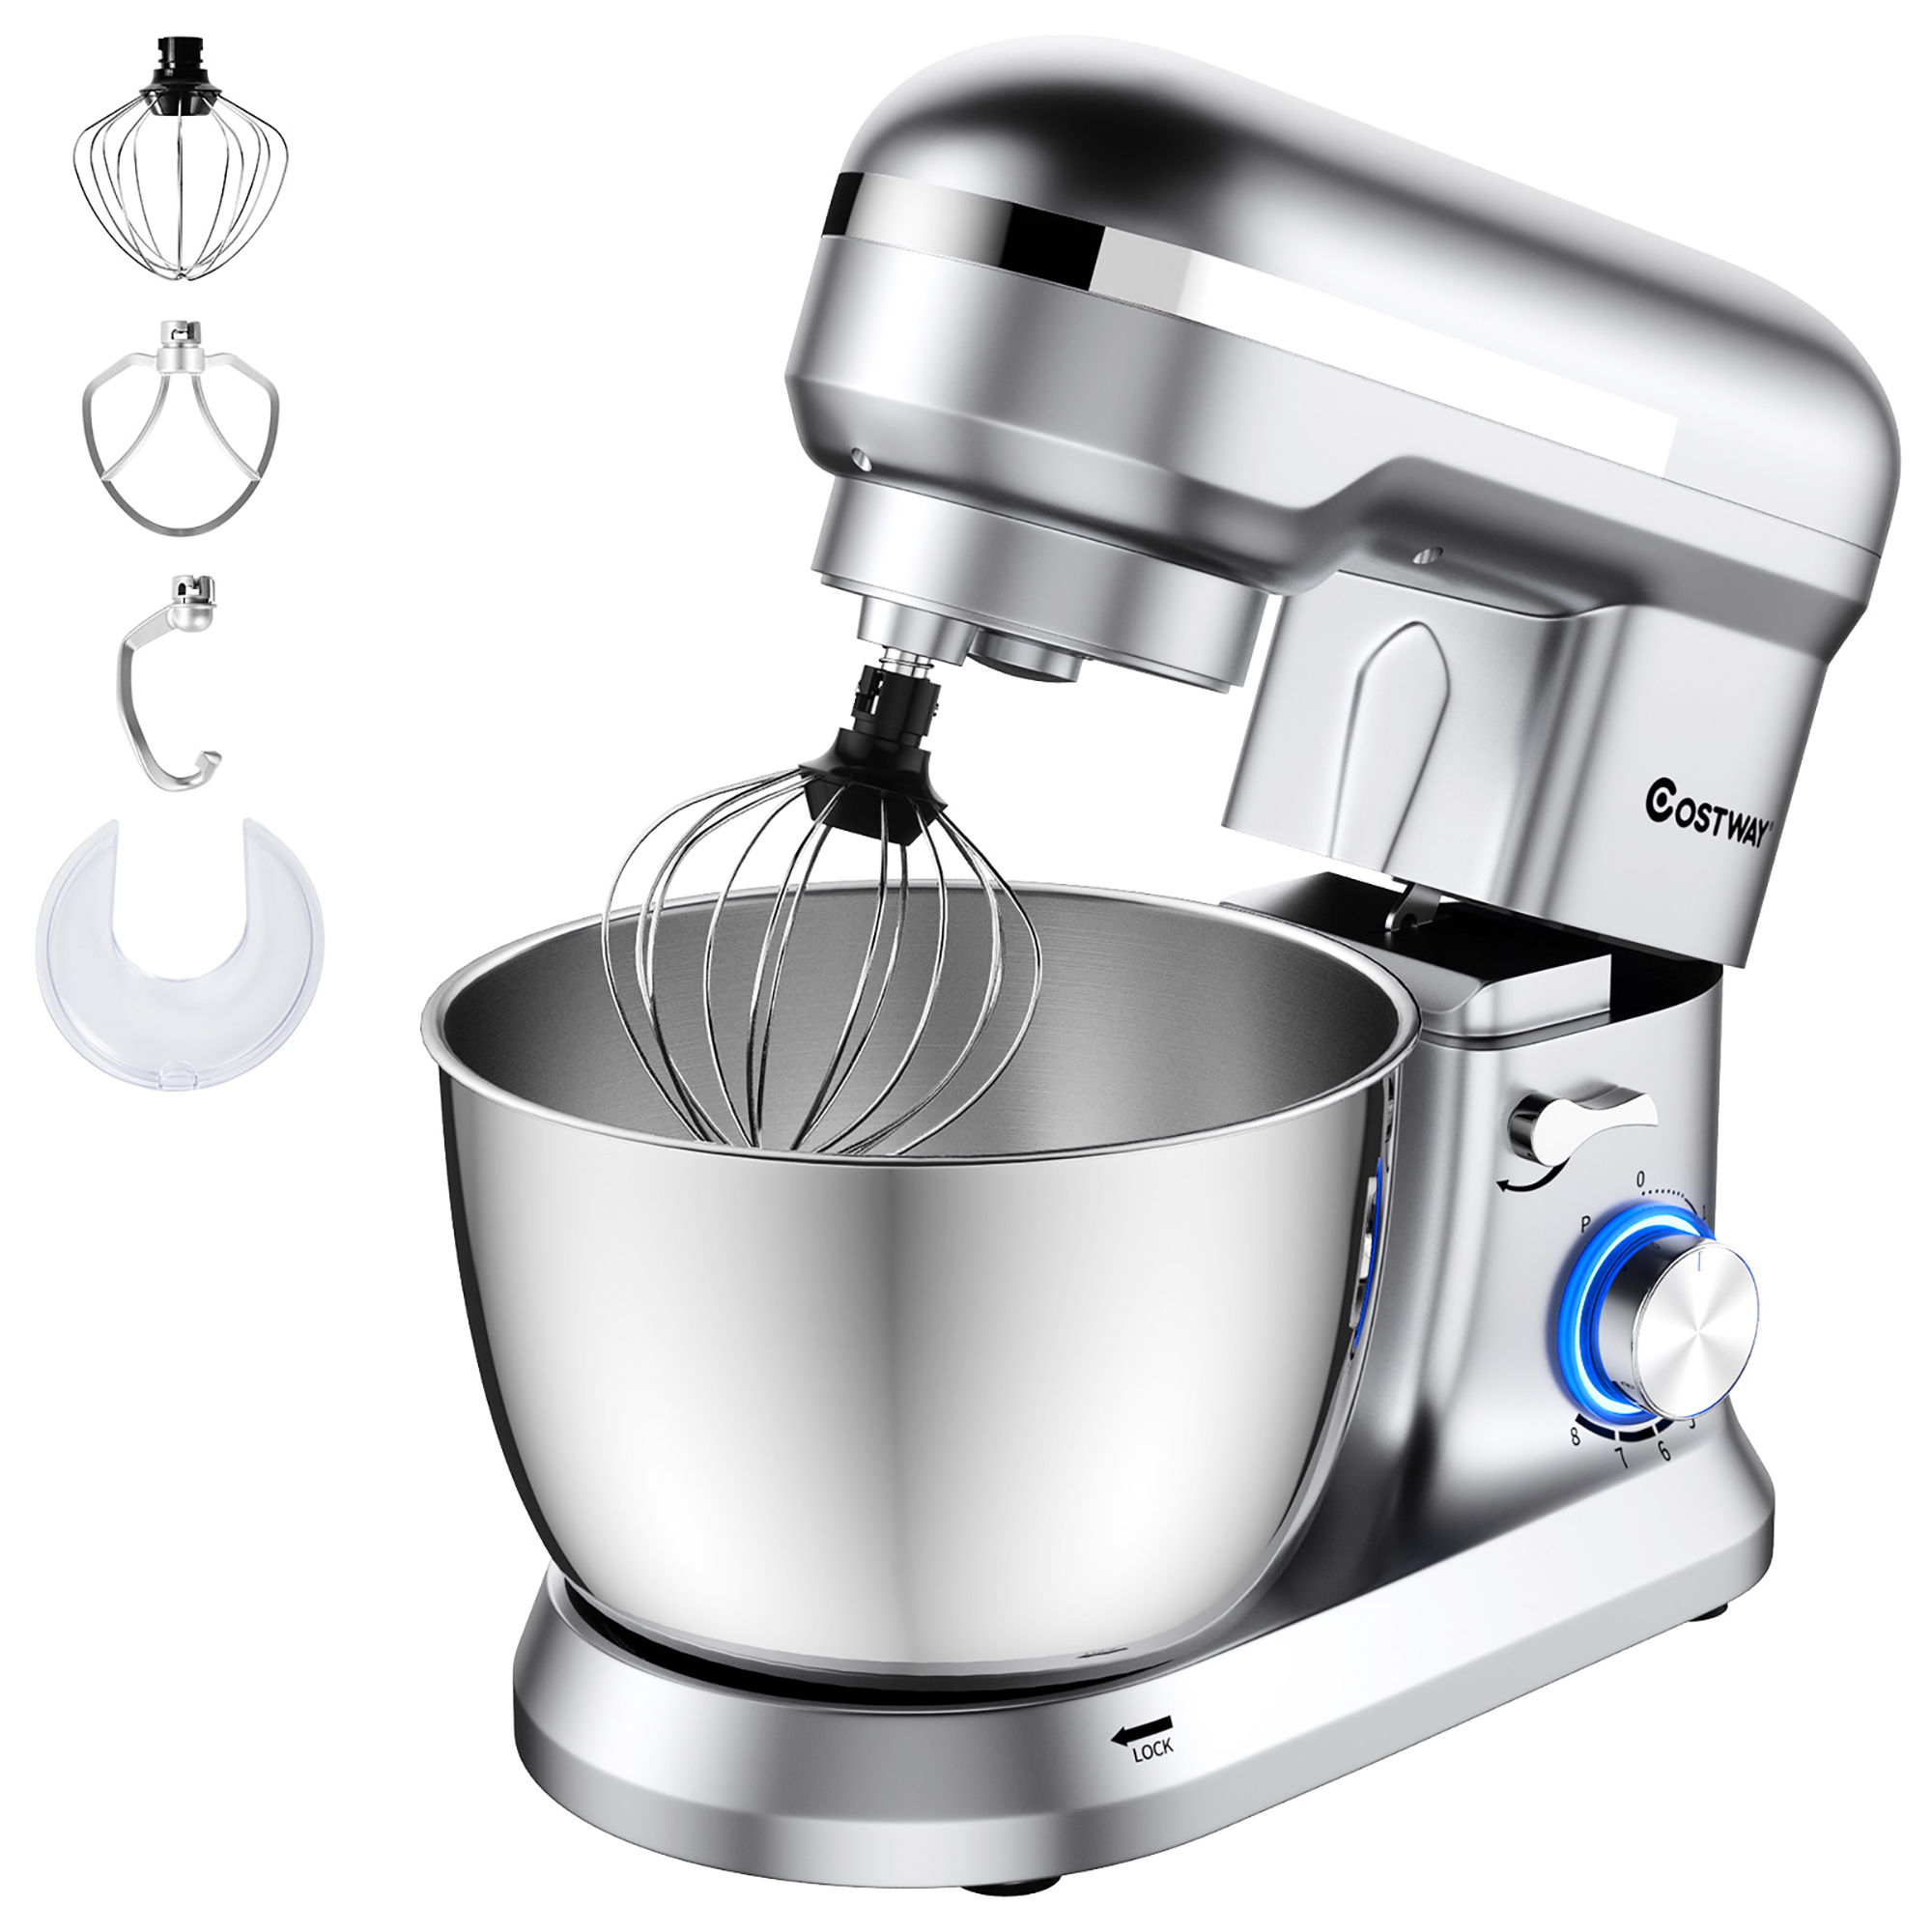 Costway 4.8 QT Stand Mixer 8-speed Electric Food Mixer w/Dough Hook Beater - image 1 of 10